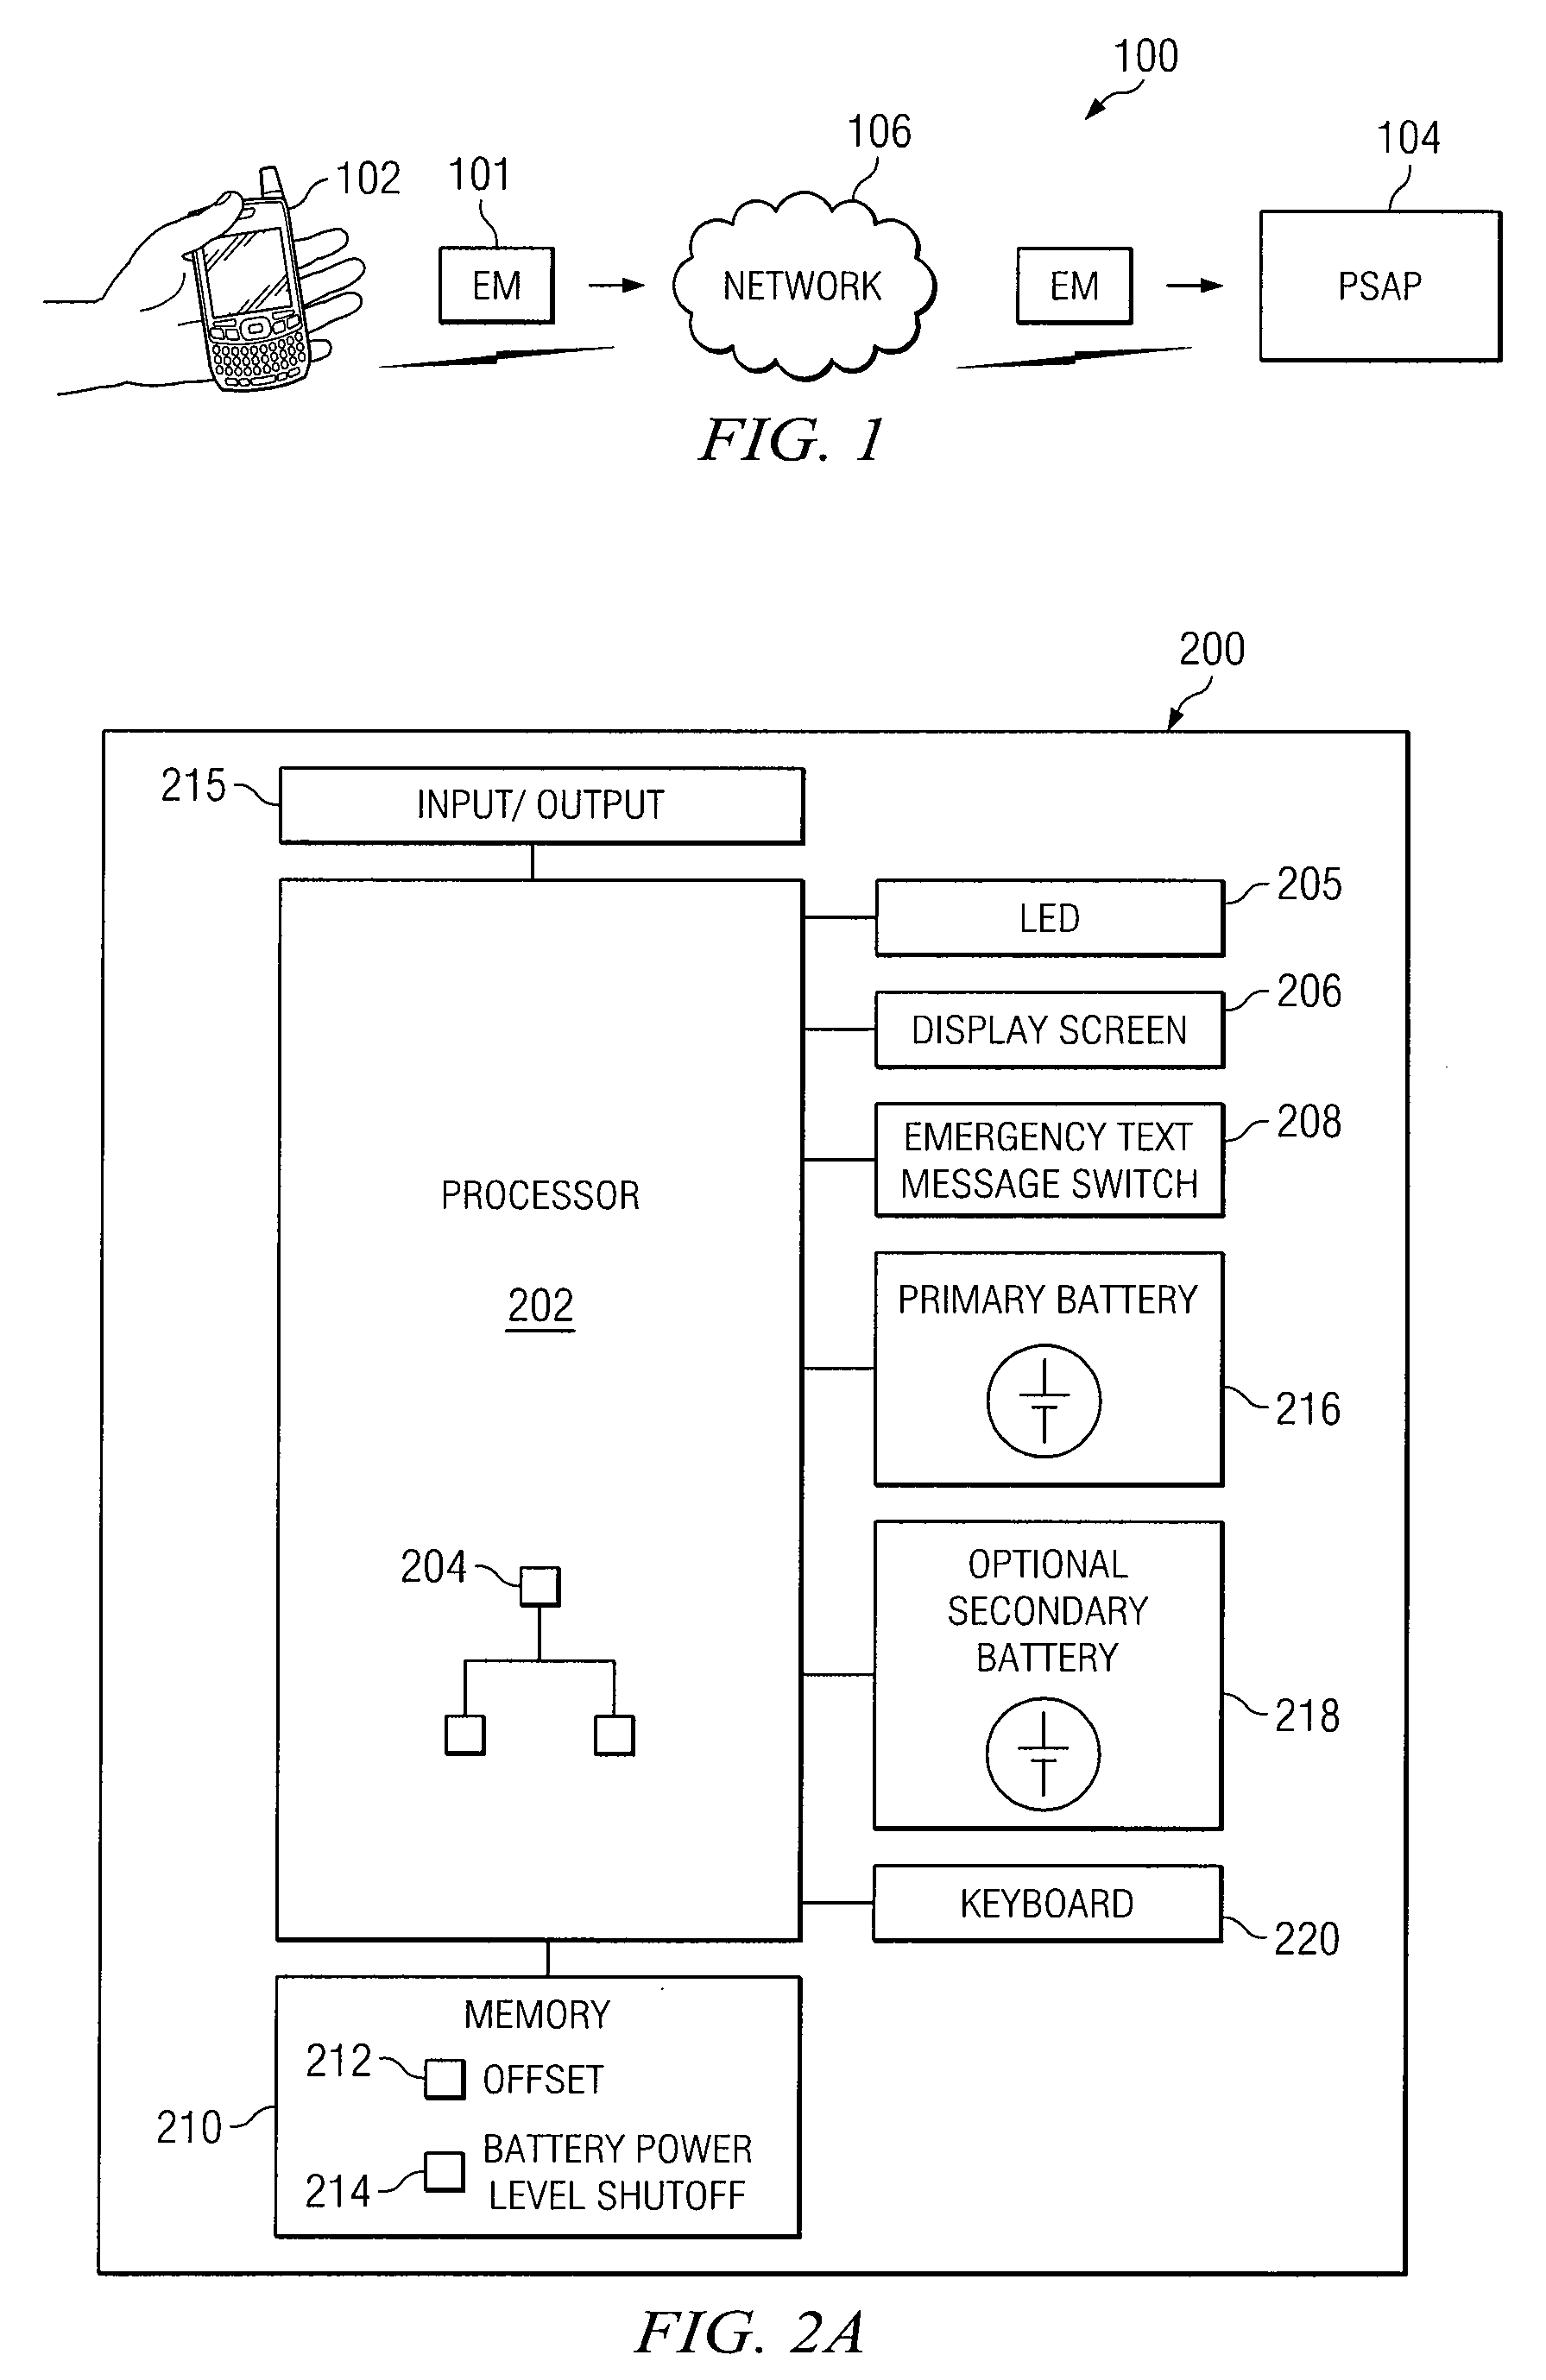 Battery charge reservation for emergency communications